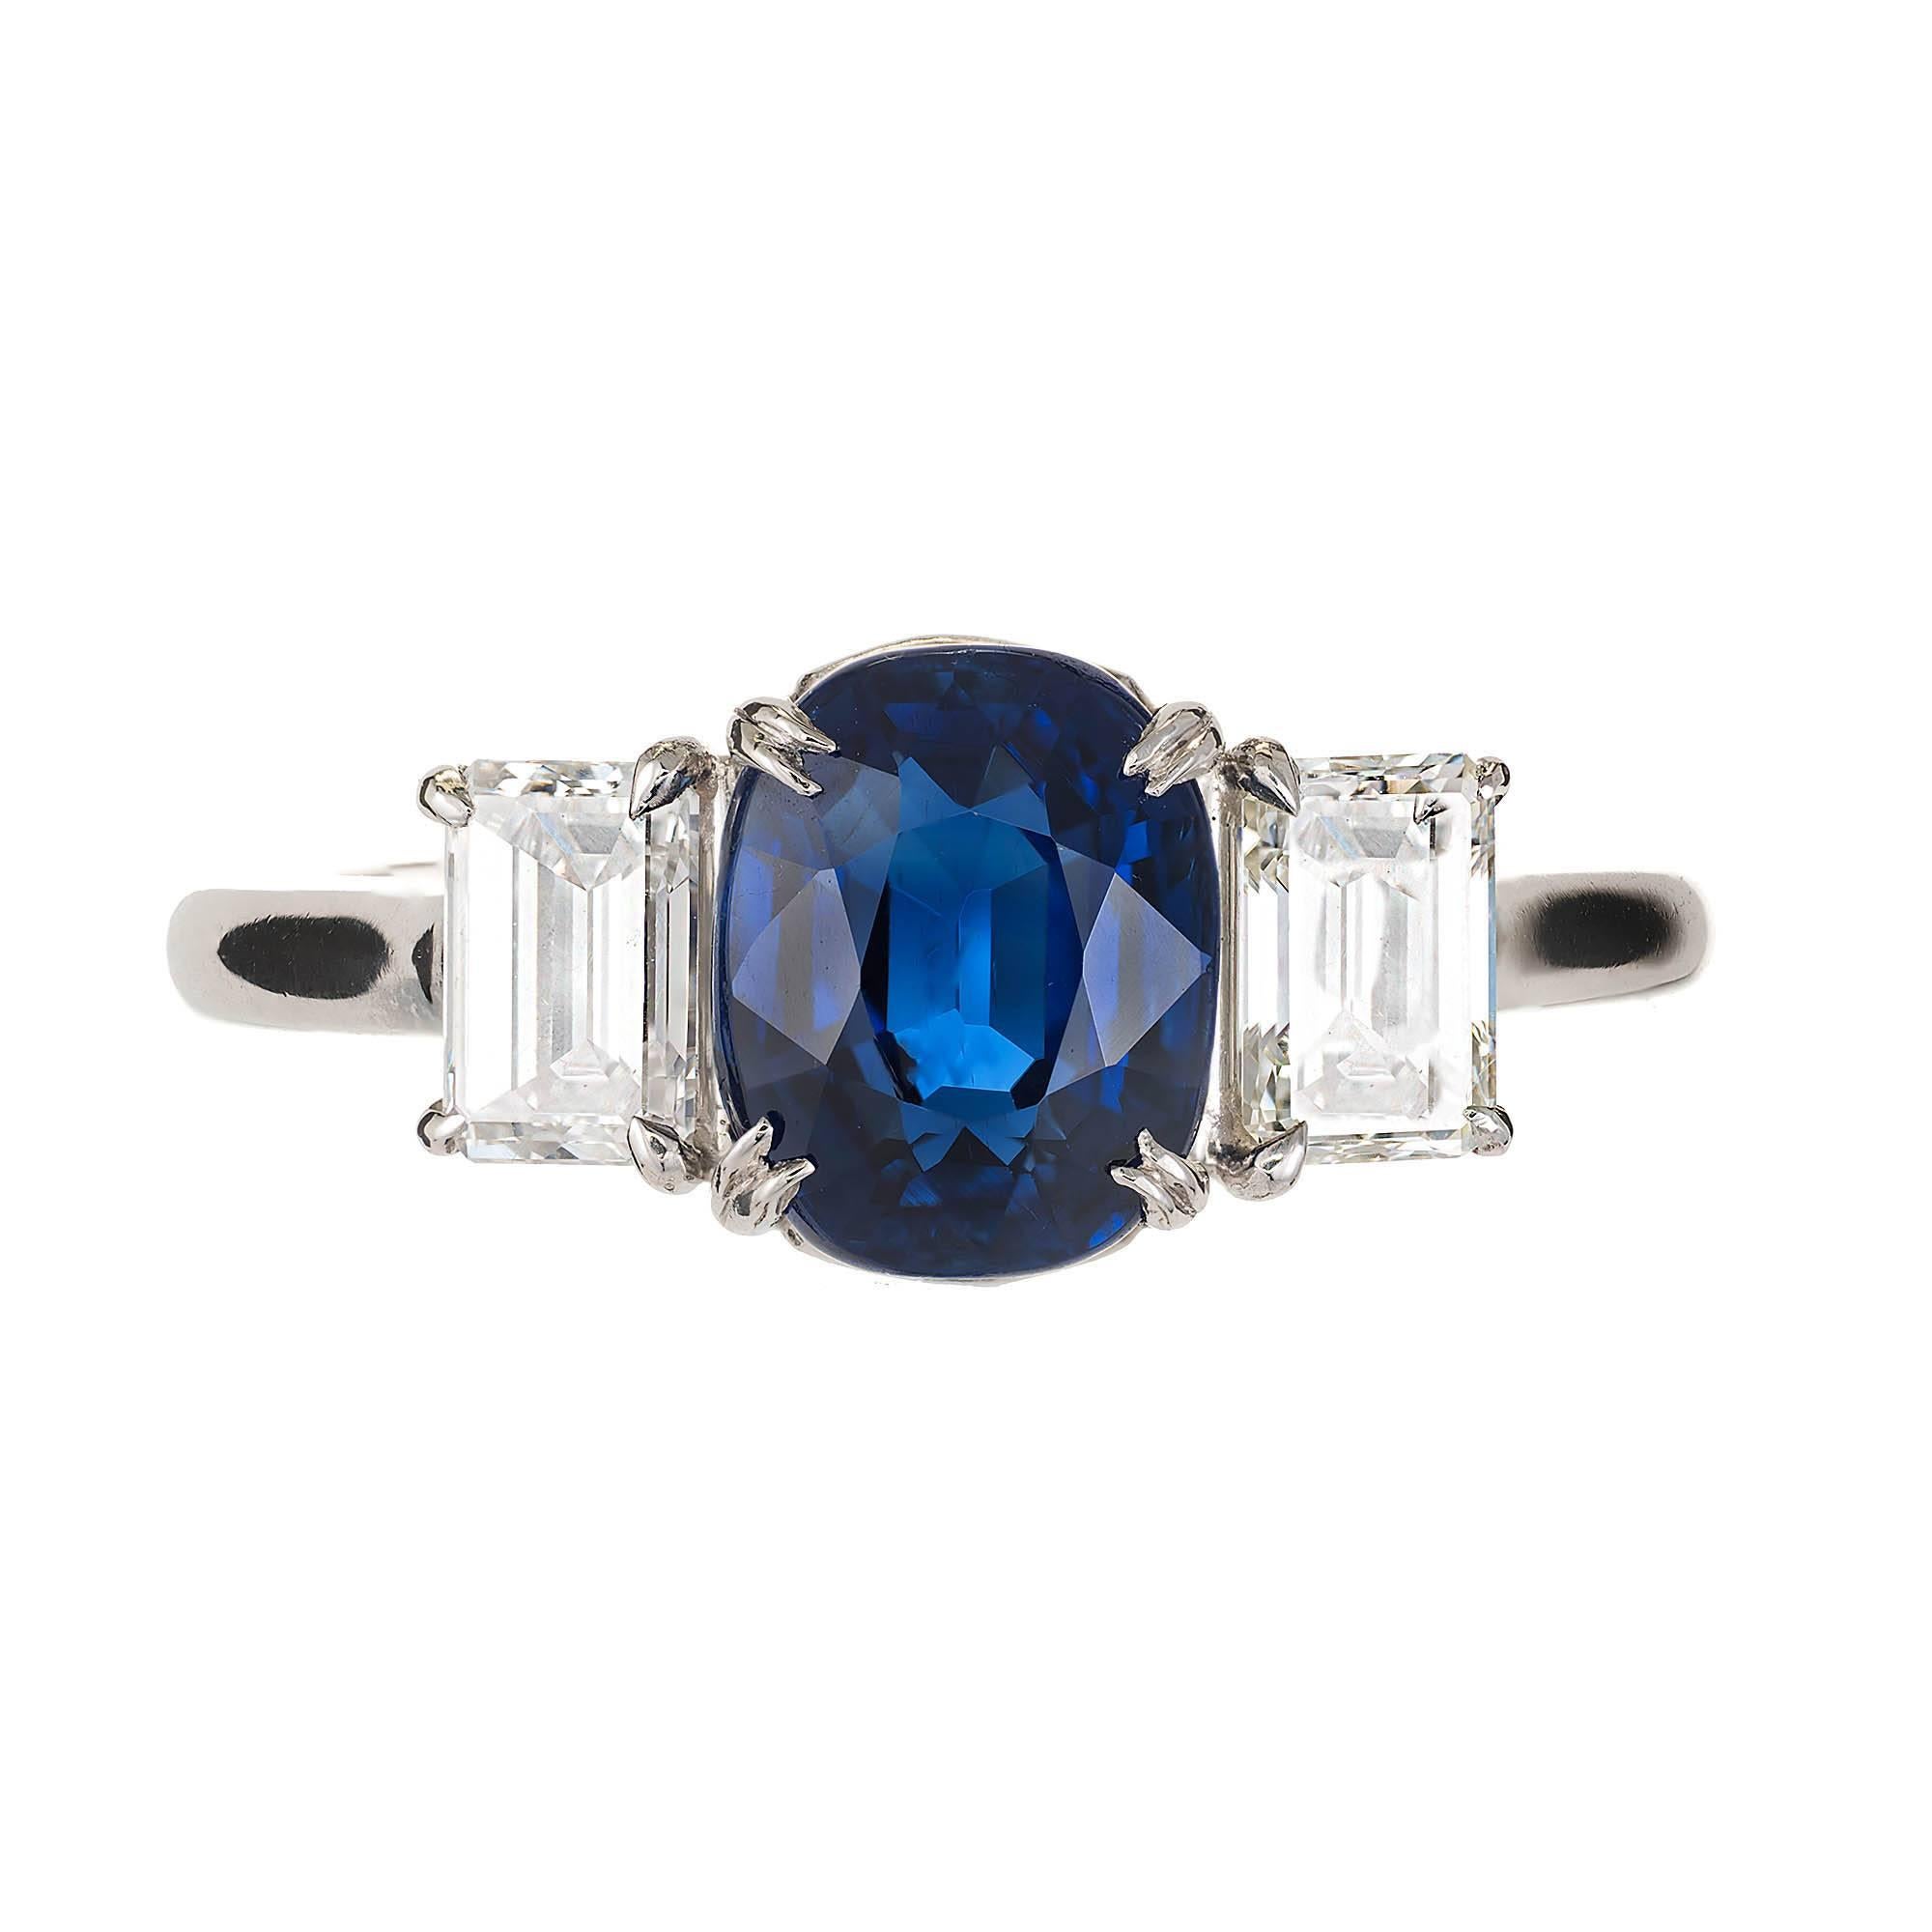 Sapphire and diamond three-stone engagement ring. Cushion cut  3.11ct center sapphire Sapphire, pure deep bright blue from deep inside, accented with two emerald cut diamonds in a platinum setting designed by the Peter Suchy Workshop. GIA certified